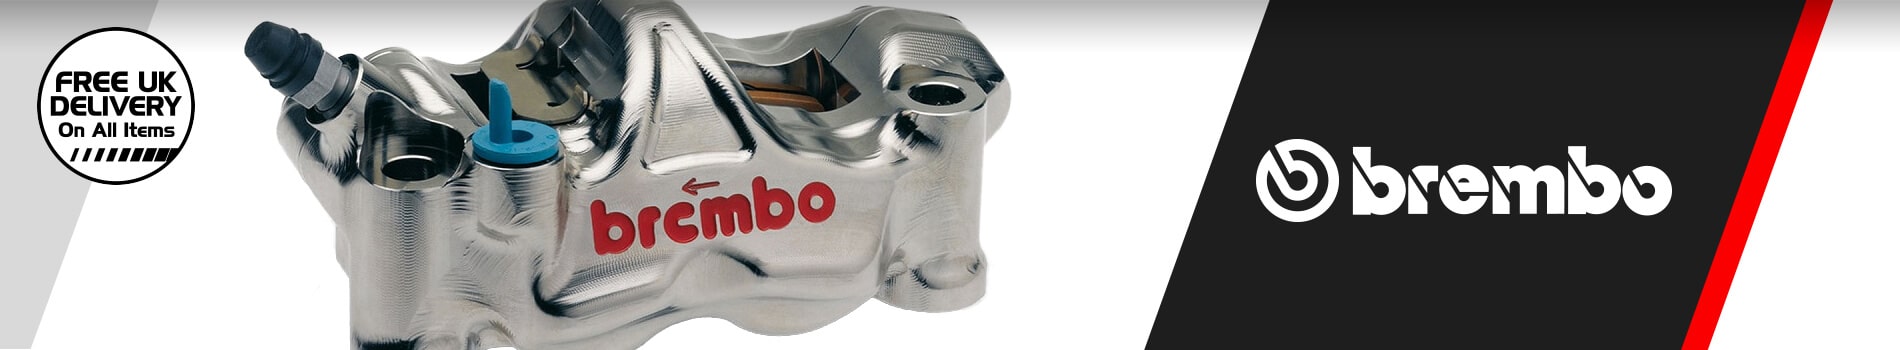 Brembo Motorcycle Brake Calipers - Free UK Delivery